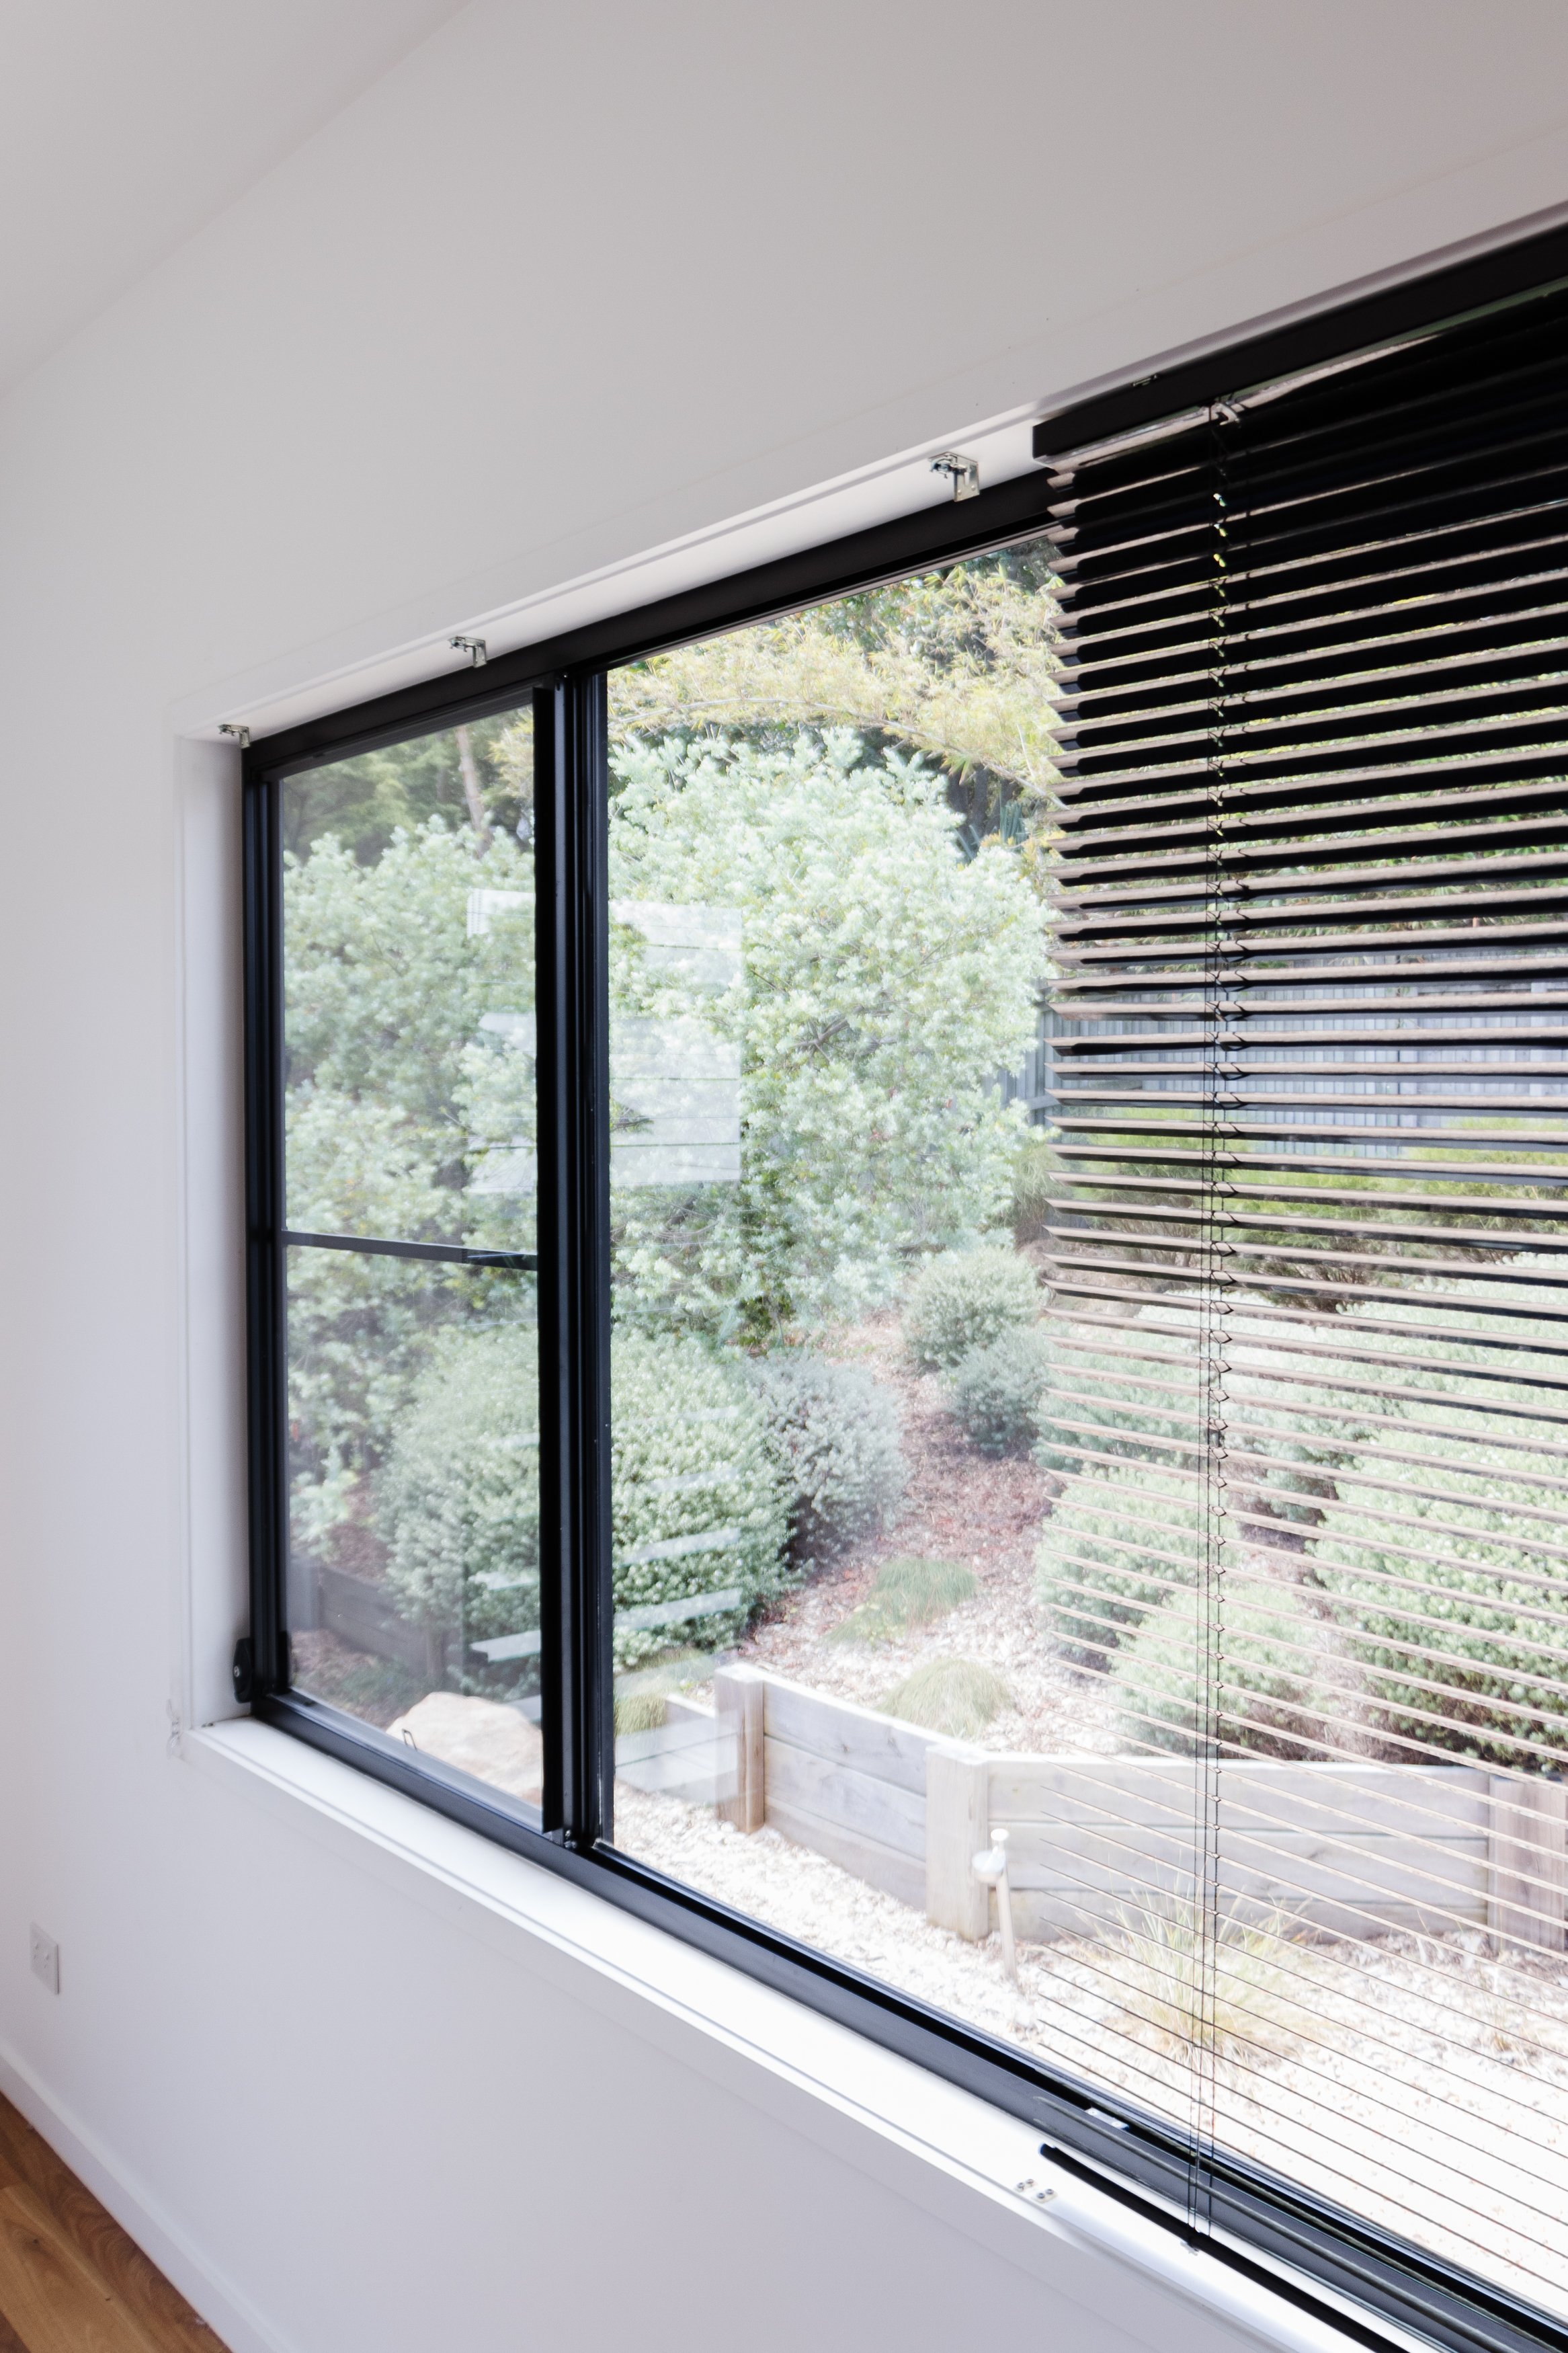 How We Upgraded The Blinds In Our Home (9 of 38).jpg